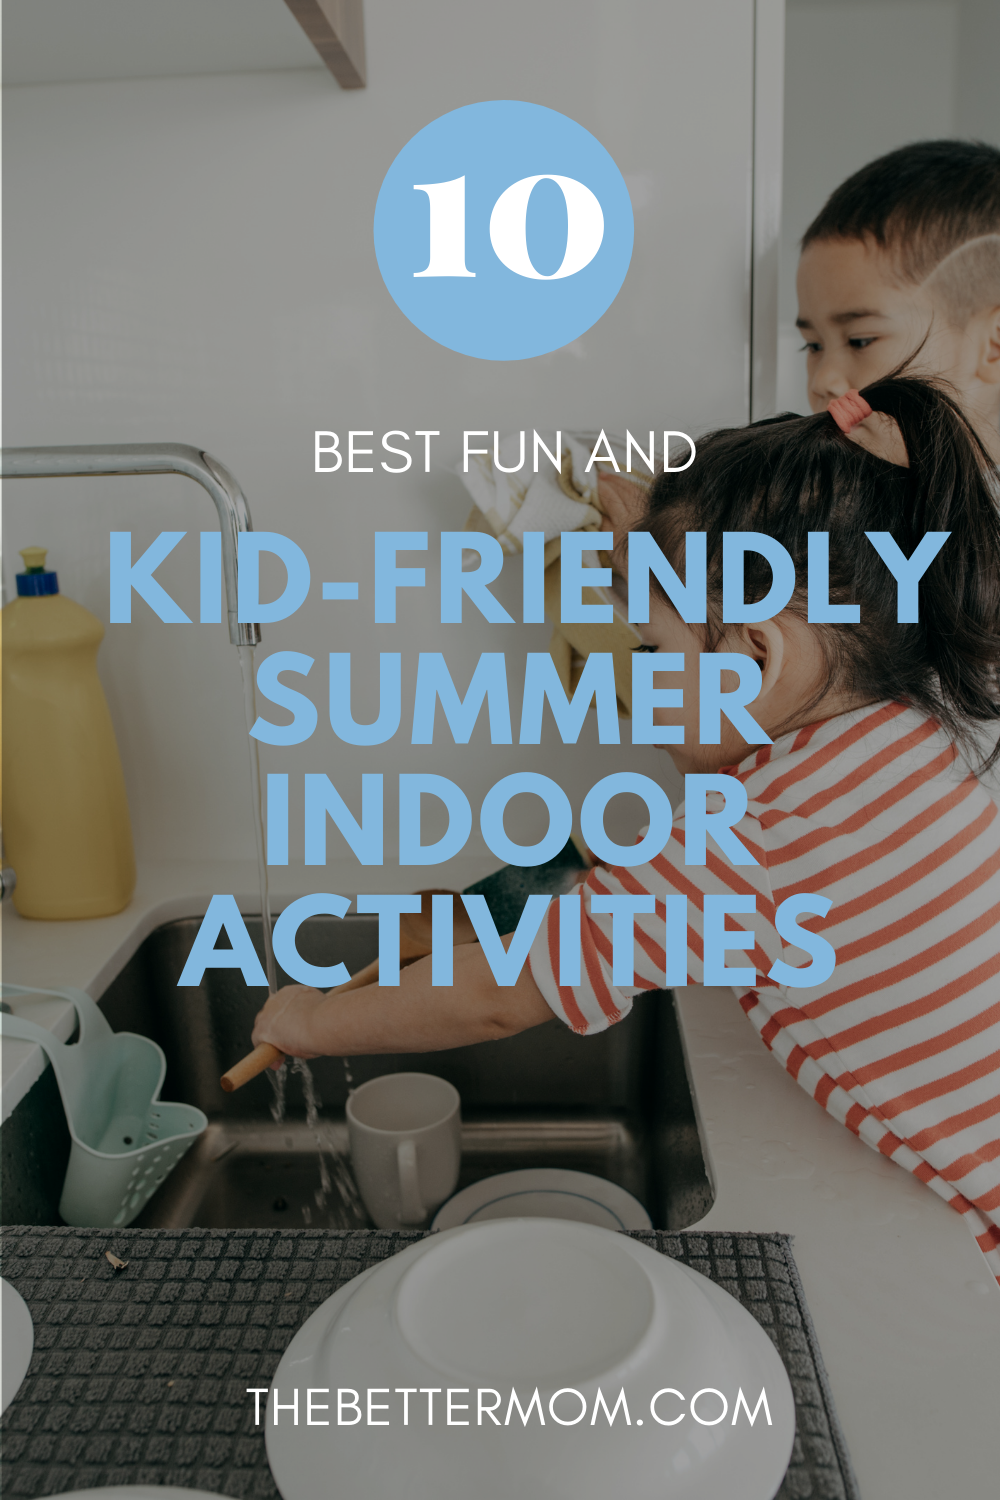 When it comes to busting kids’ boredom, lists have saved me more than once. And although outdoor activities are wonderful, it’s nice to have a list of items to pull out on rainy, gloomy, or just-too-hot days. Here’s a list of 10 kid-friendly activities to do indoors!